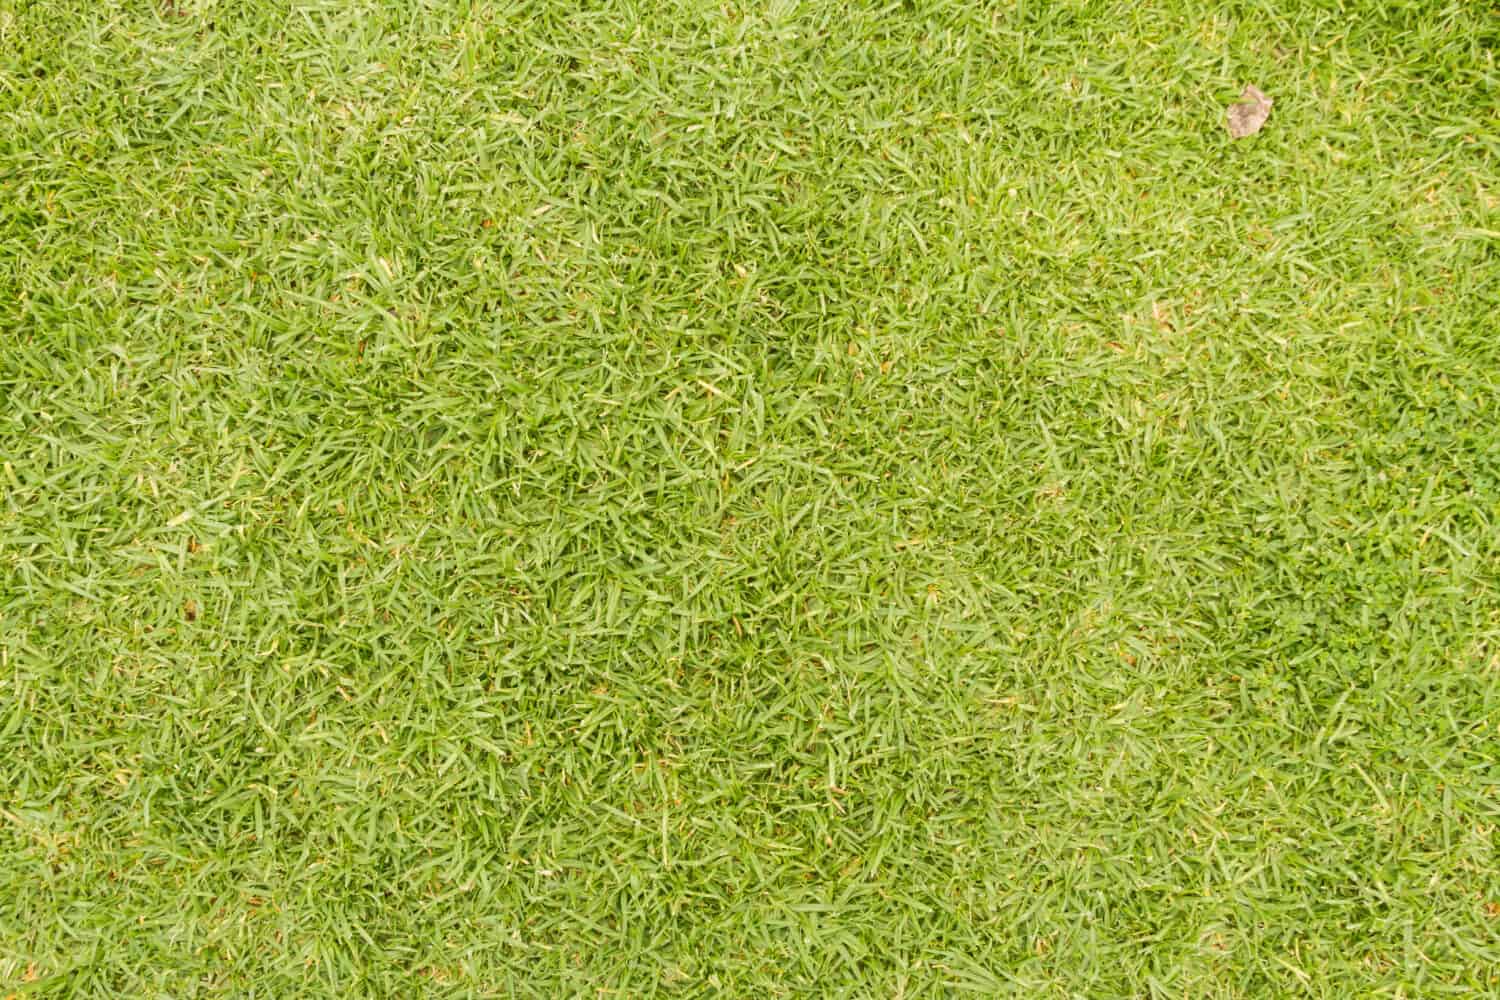 Close up of green grass seen from above